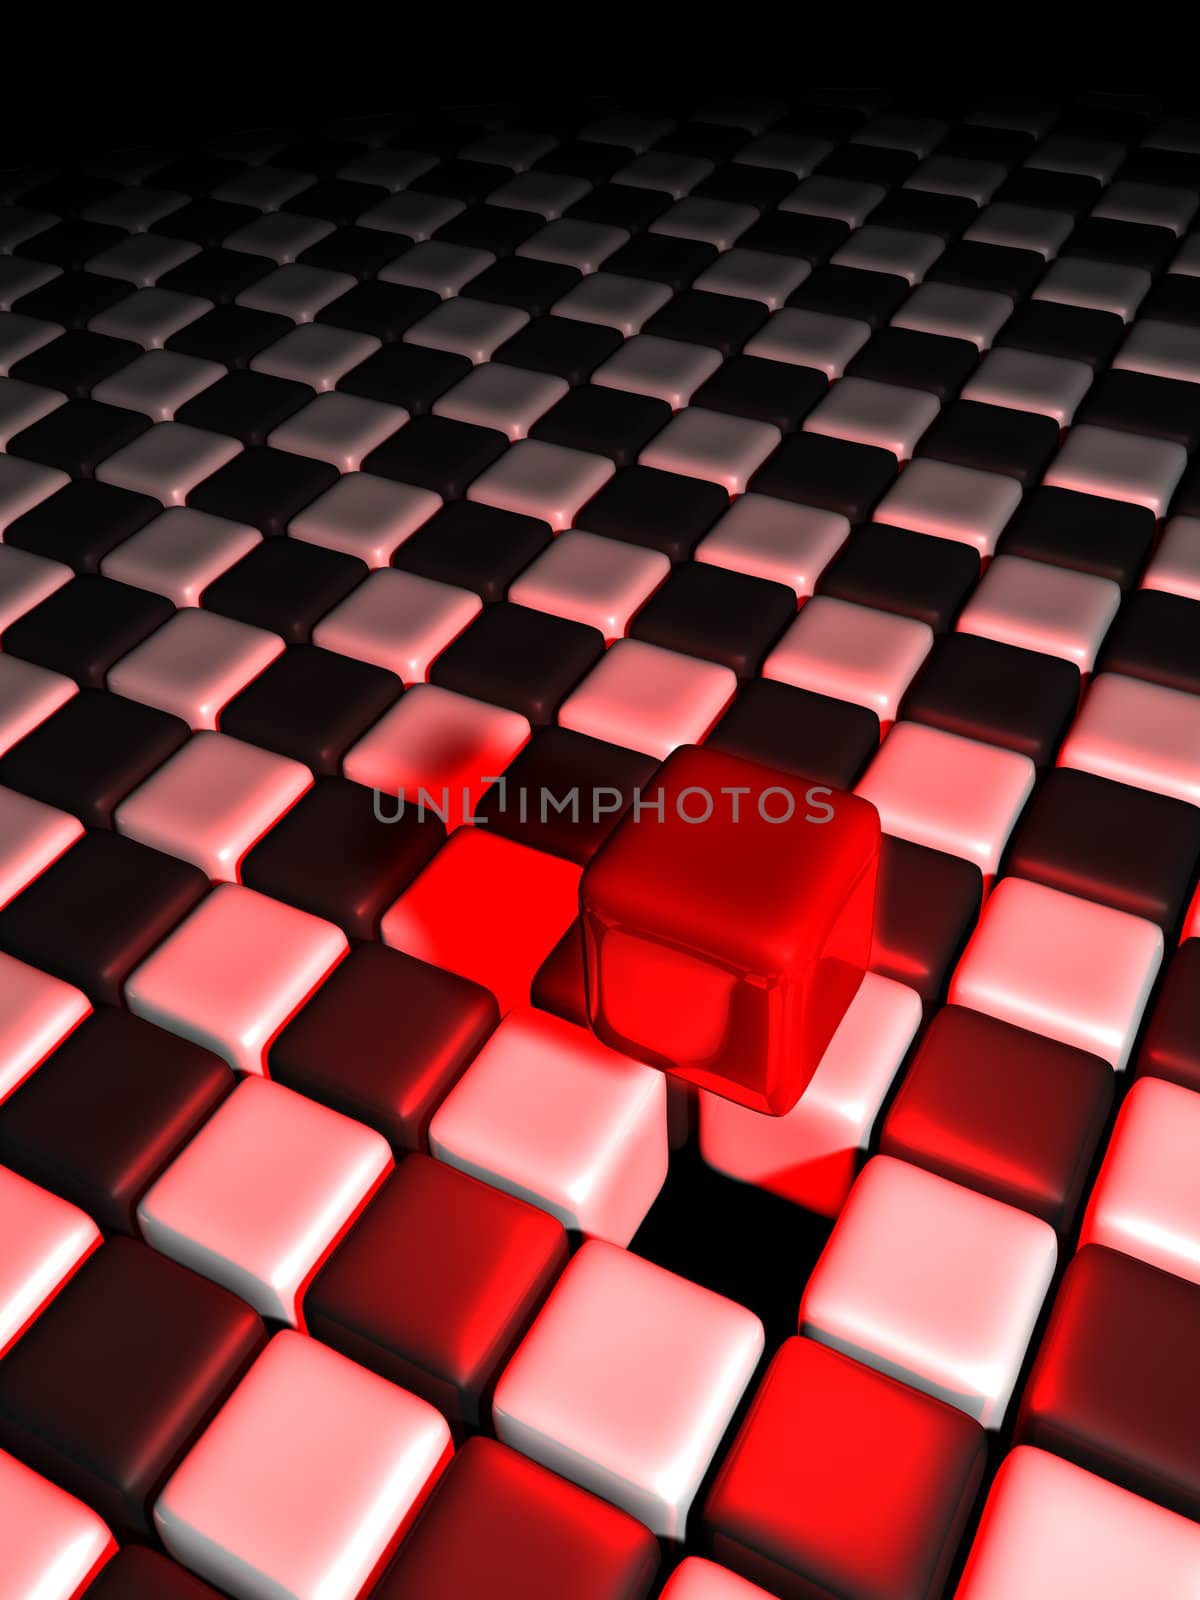 Red cube alone above many black and white cubes with a dark background